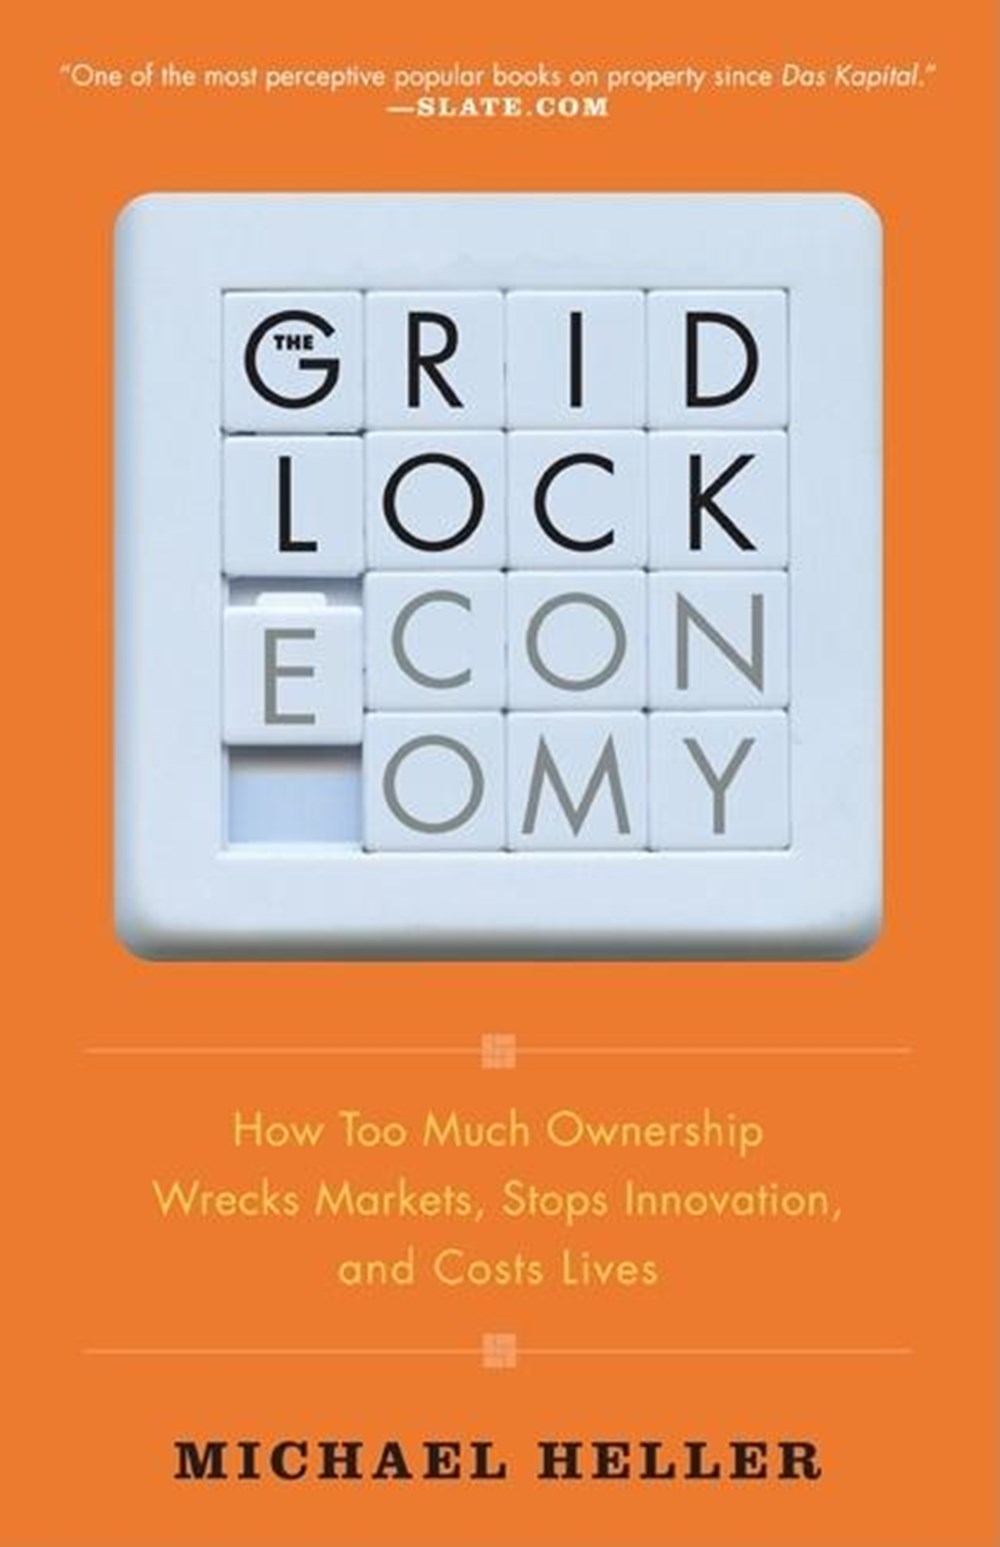 Gridlock Economy: How Too Much Ownership Wrecks Markets, Stops Innovation, and Costs Lives